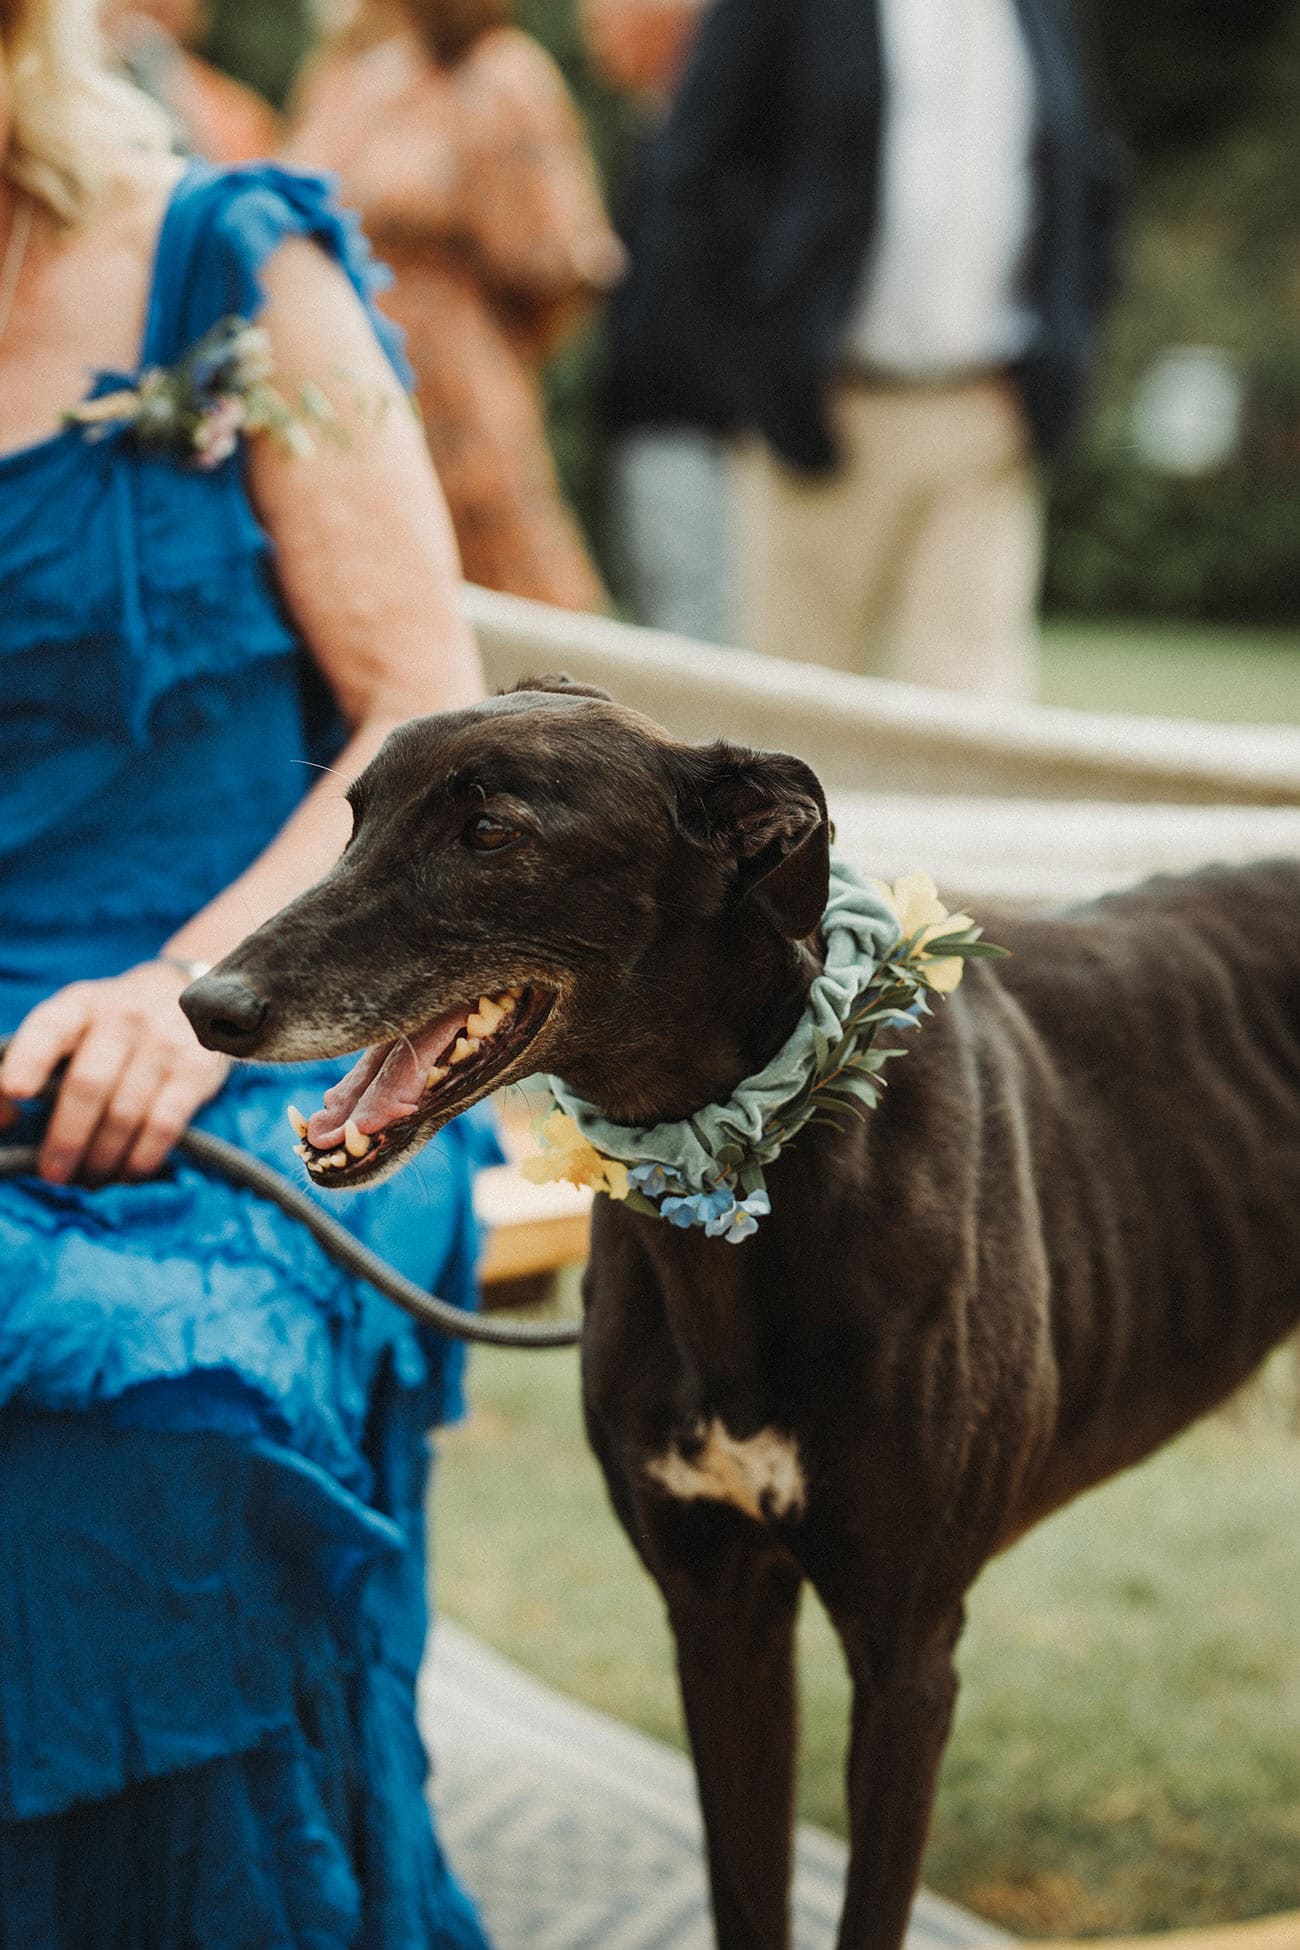 Dog with a collar made of flowers enjoying the wedding